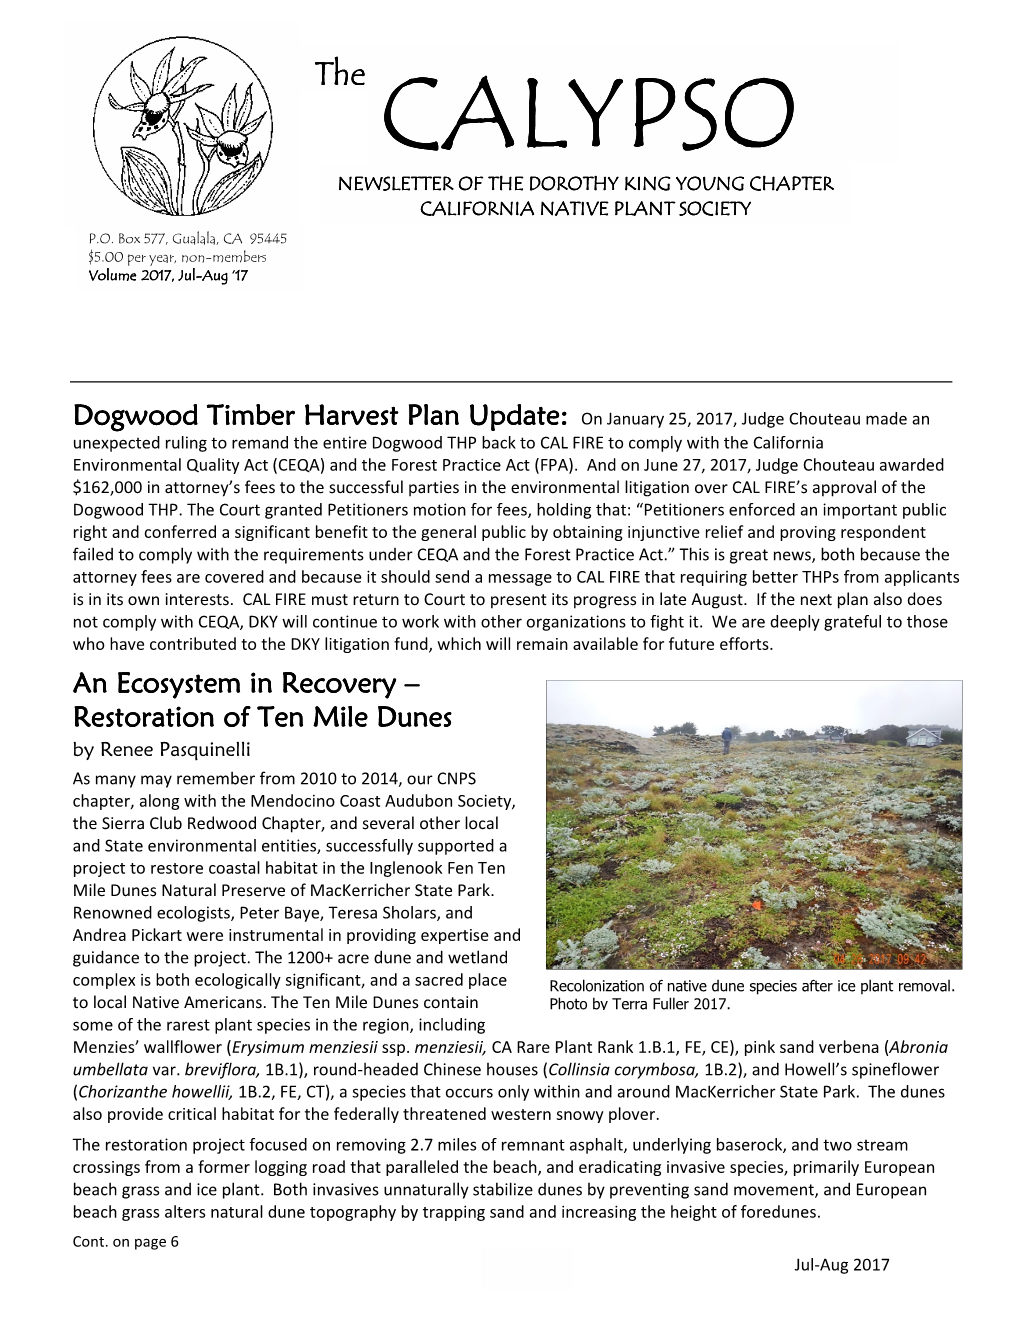 Calypso Newsletter of the Dorothy King Young Chapter California Native Plant Society